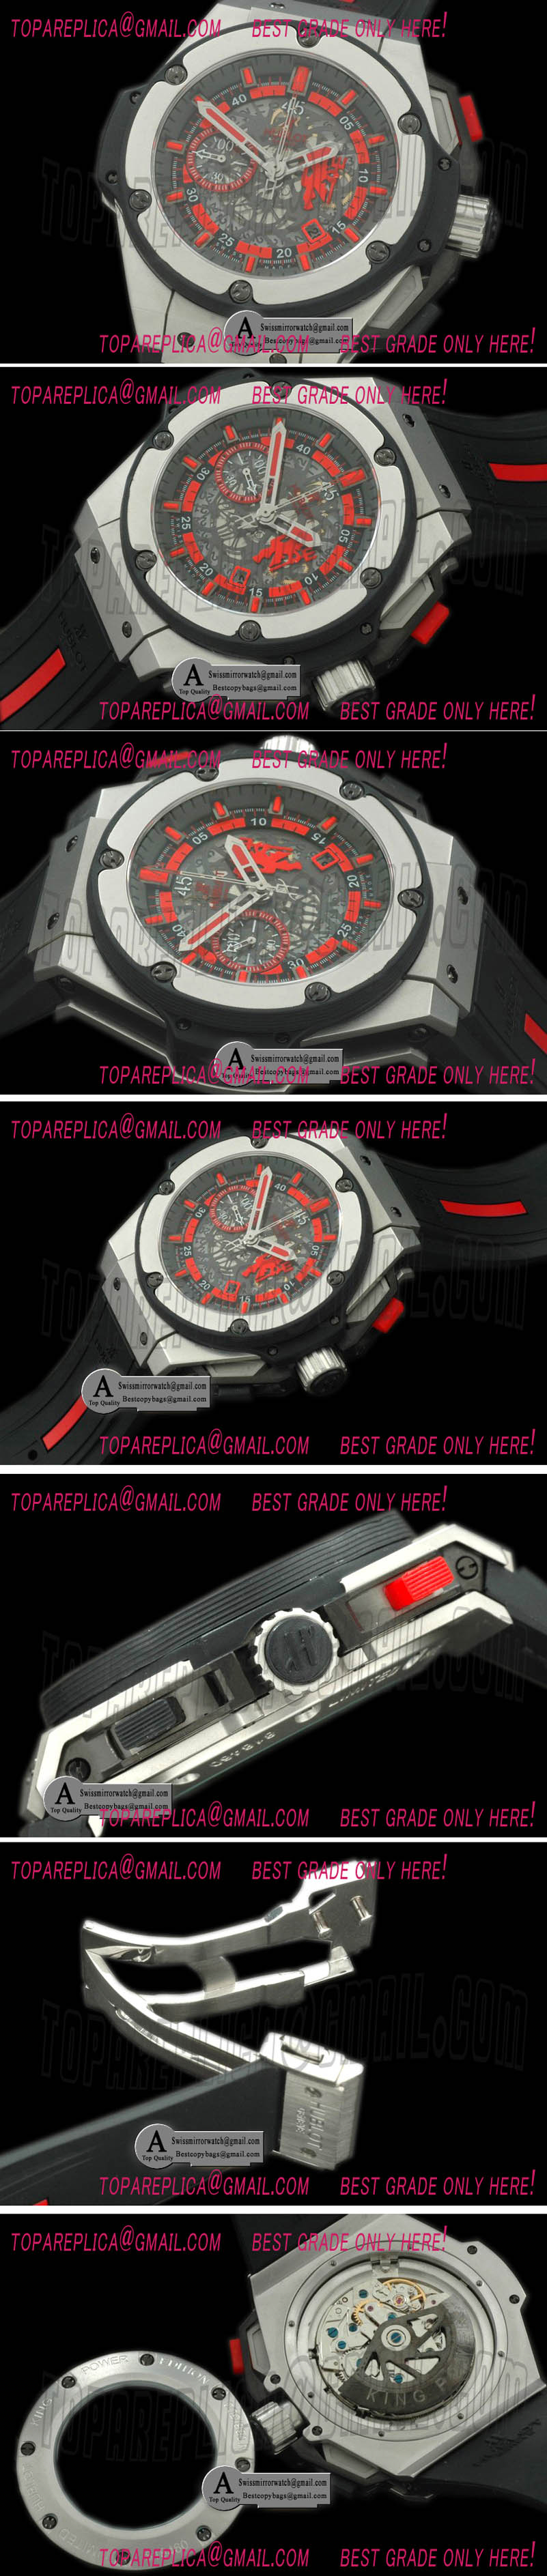 Hublot King Power Red Devil SS/Rubber Skeleton Asian 7750 Replica Watches